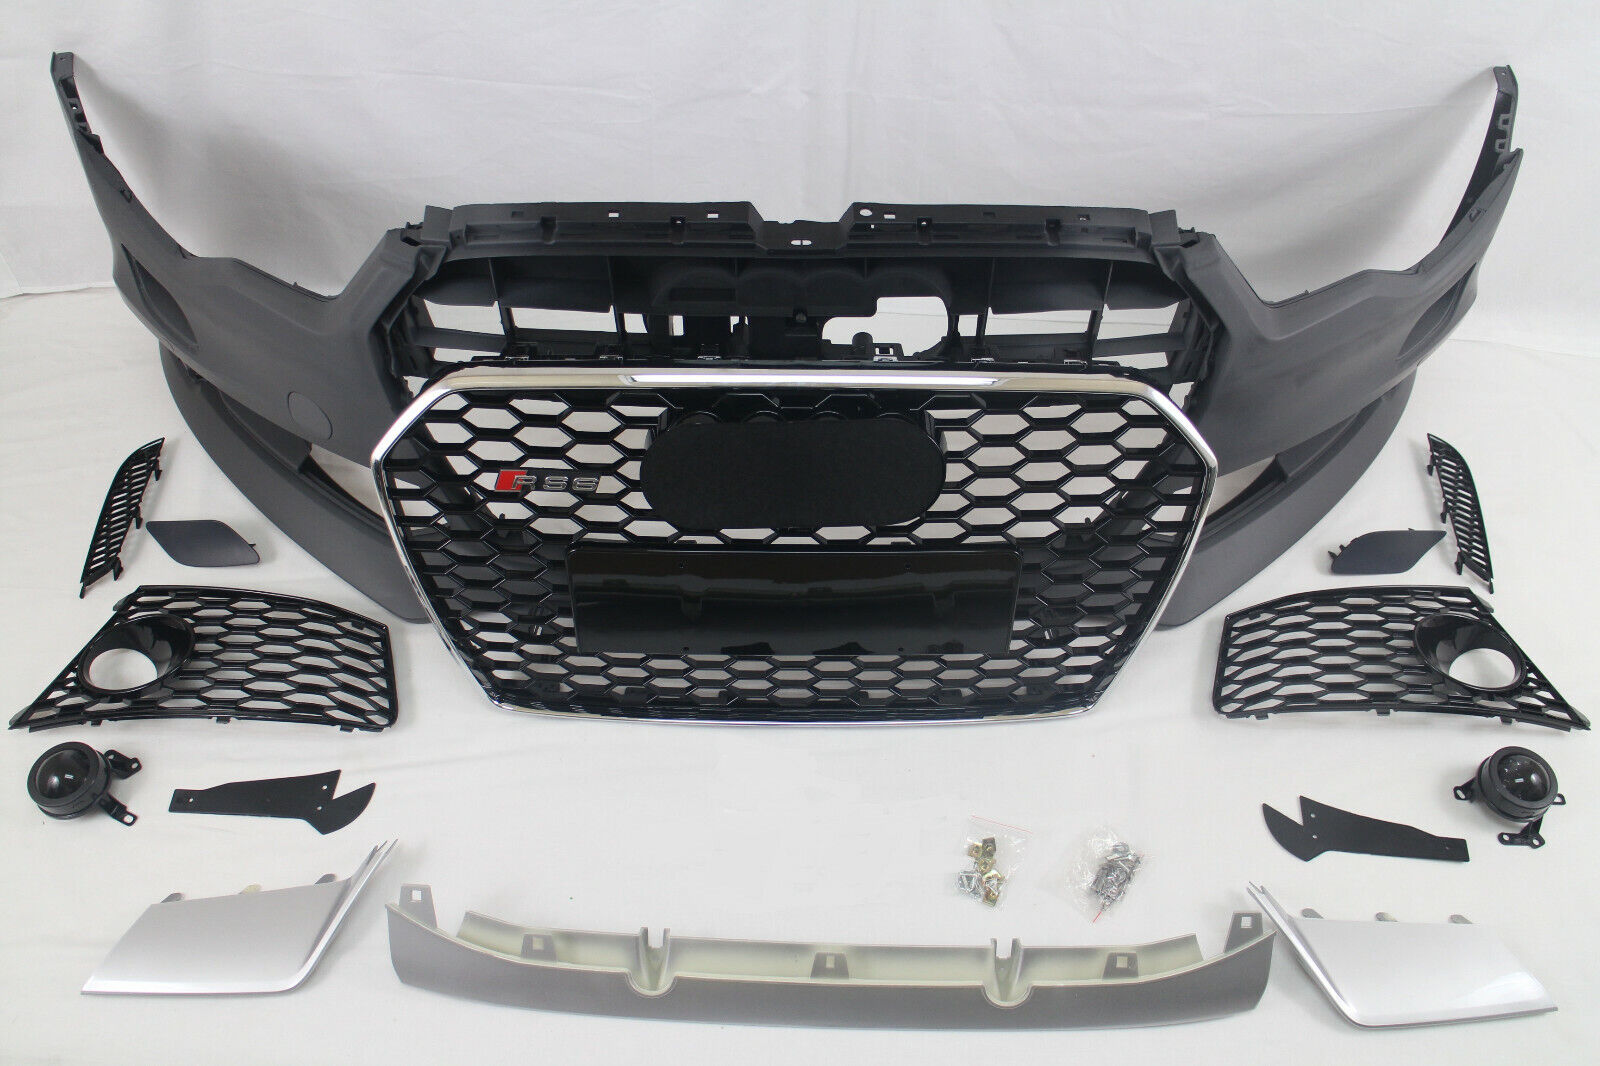  RS6 Style Front Bumper grille valance Conversion Kit for 2012 -15 C7 A6 S6 C7.0